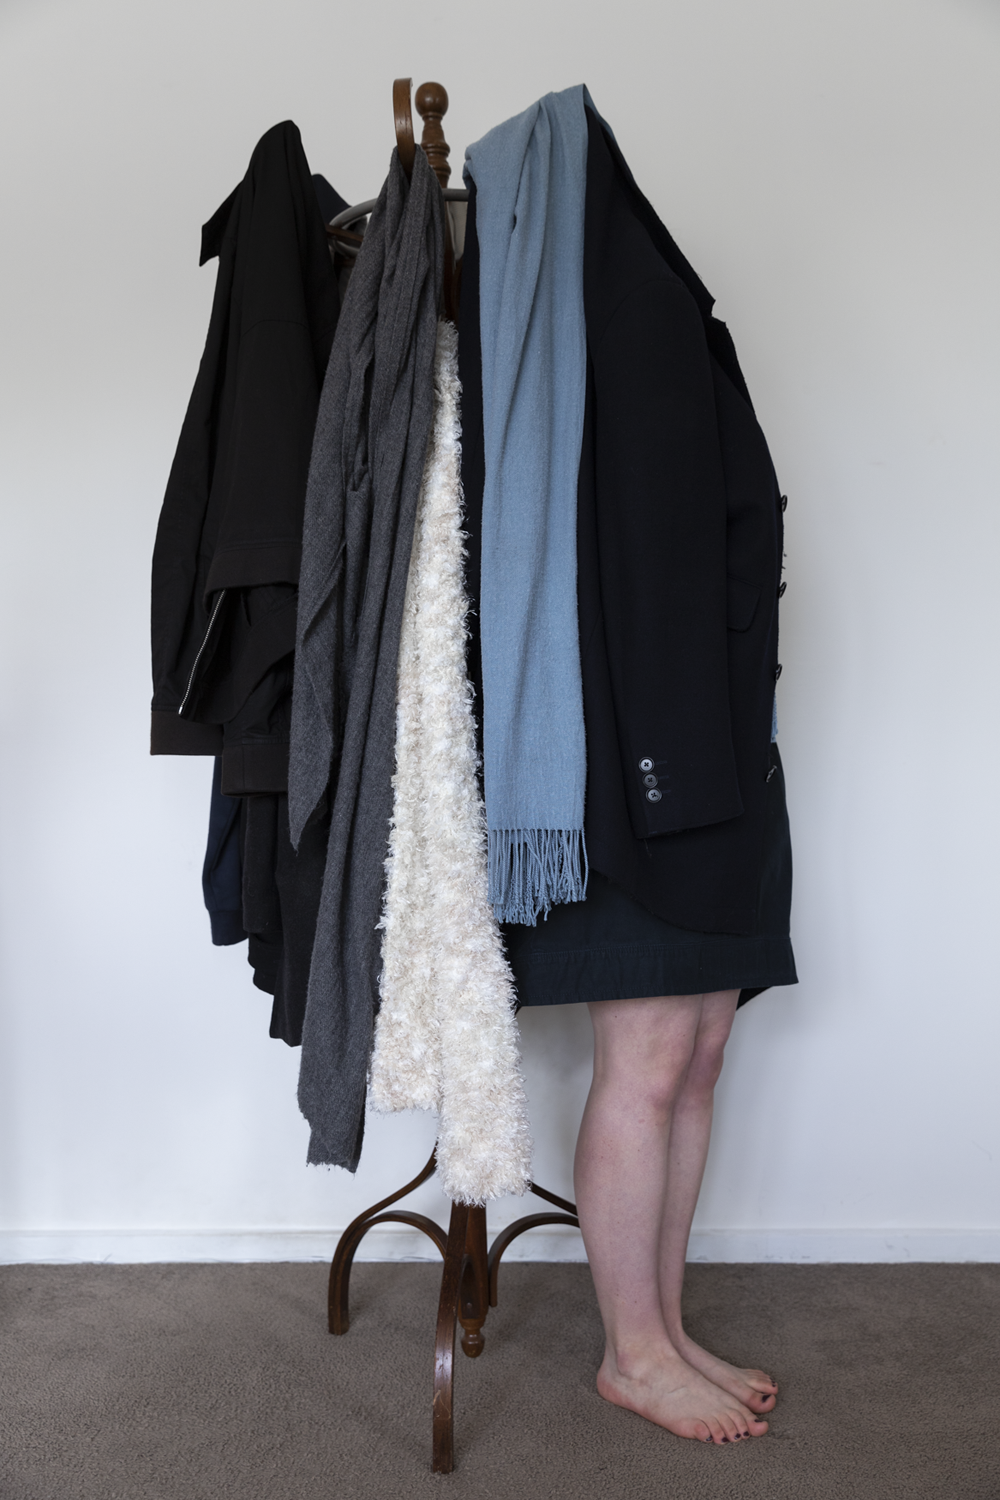 Colour photograph of coat rack against white wall with two legs sticking out from the coats.